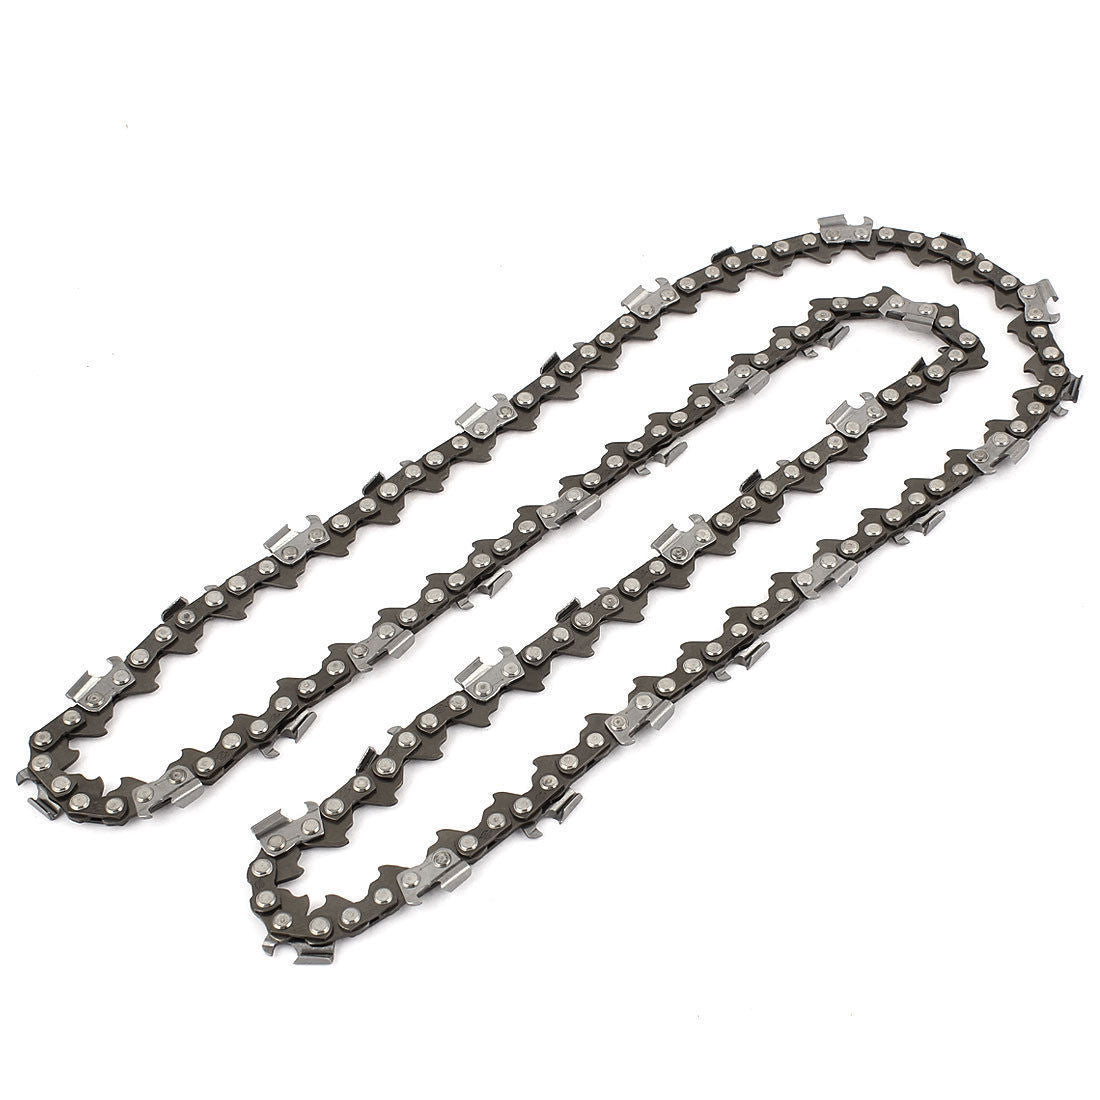 For Oregon 90PX052G Low Profile 3/8-Inch Pitch 0.043-Inch Gauge 52-DL Saw Chain